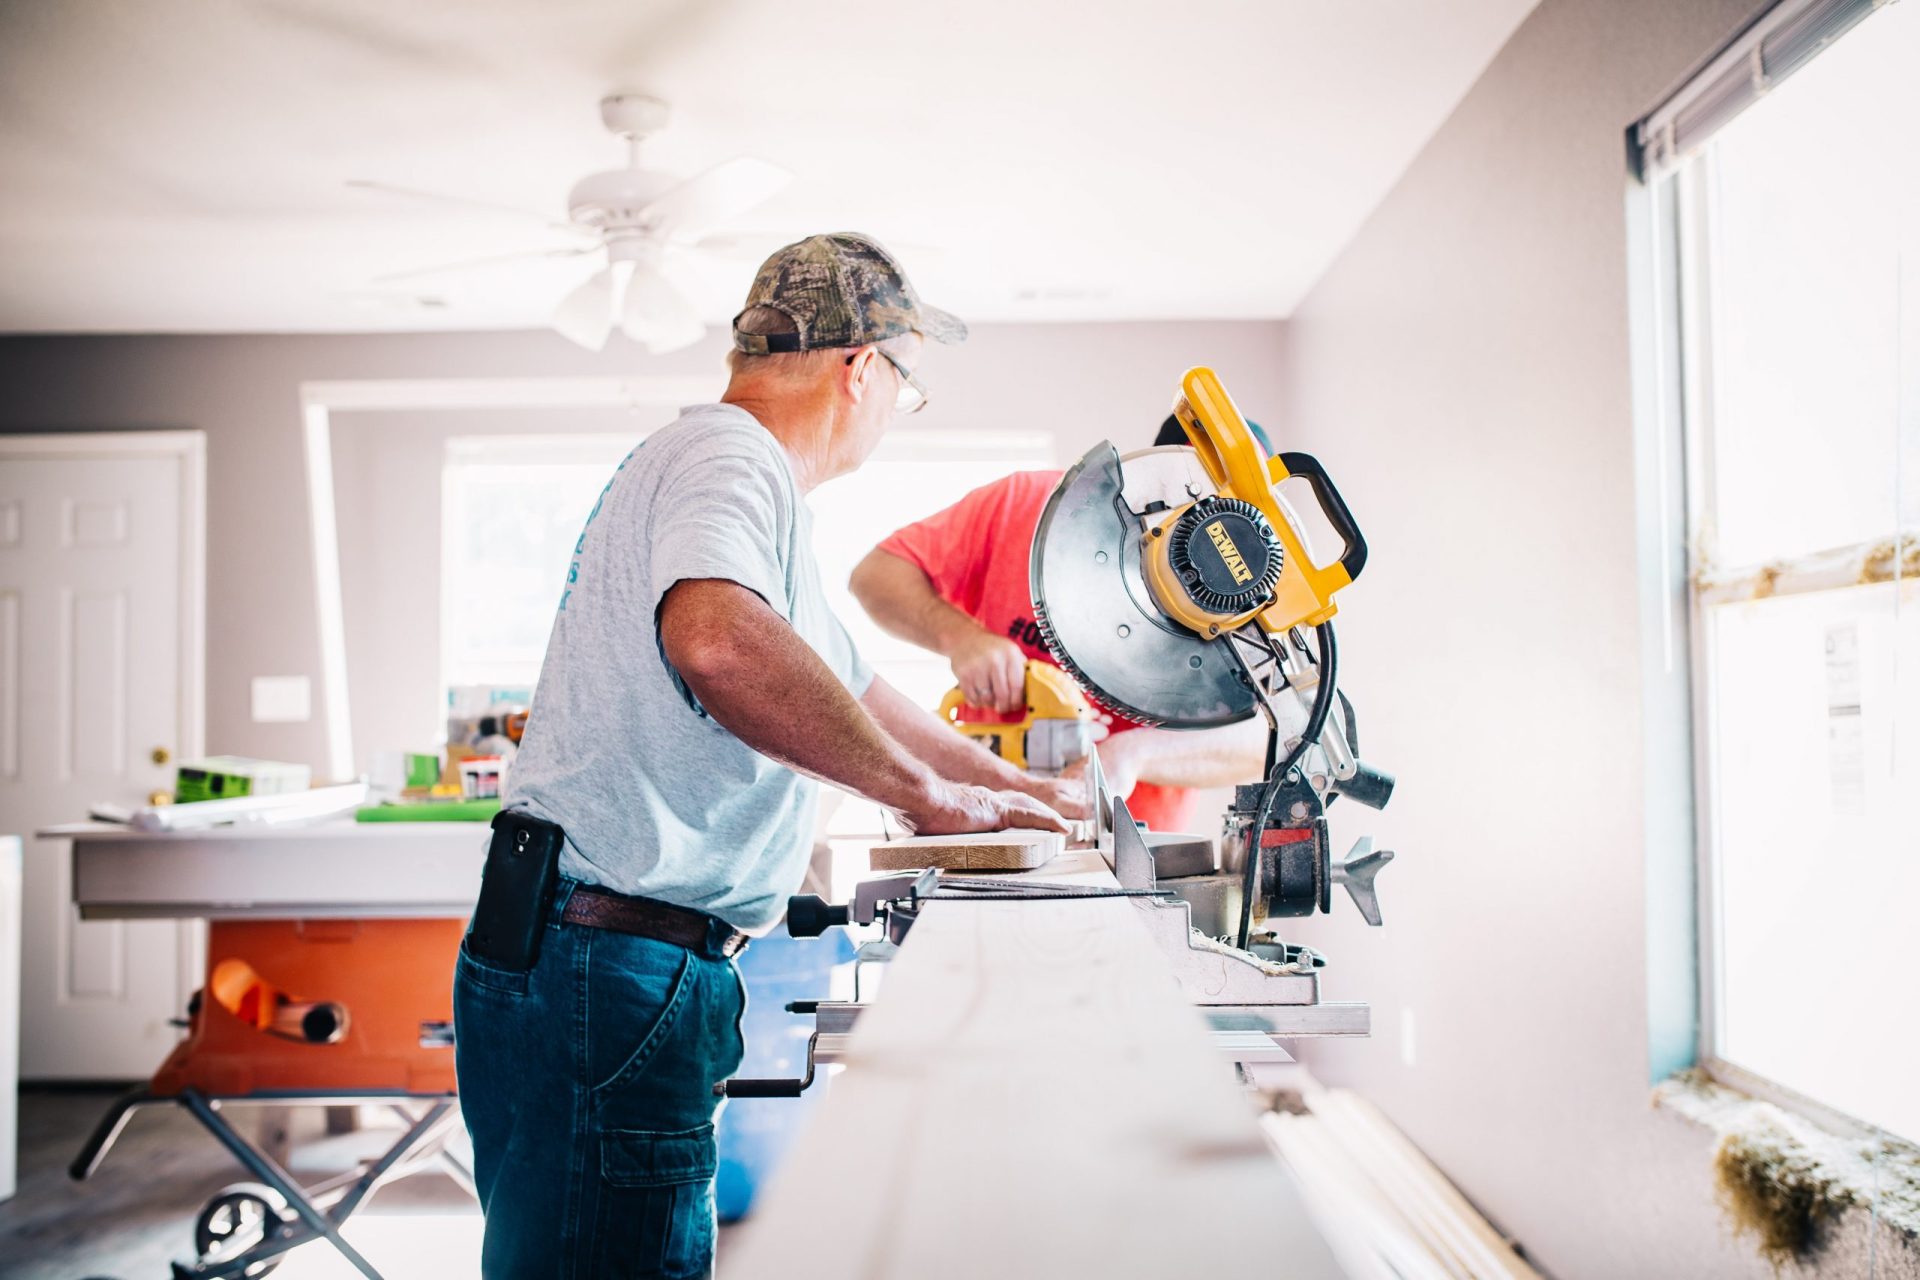 What Makes a General Contractor the Best Choice for Home Remodeling?